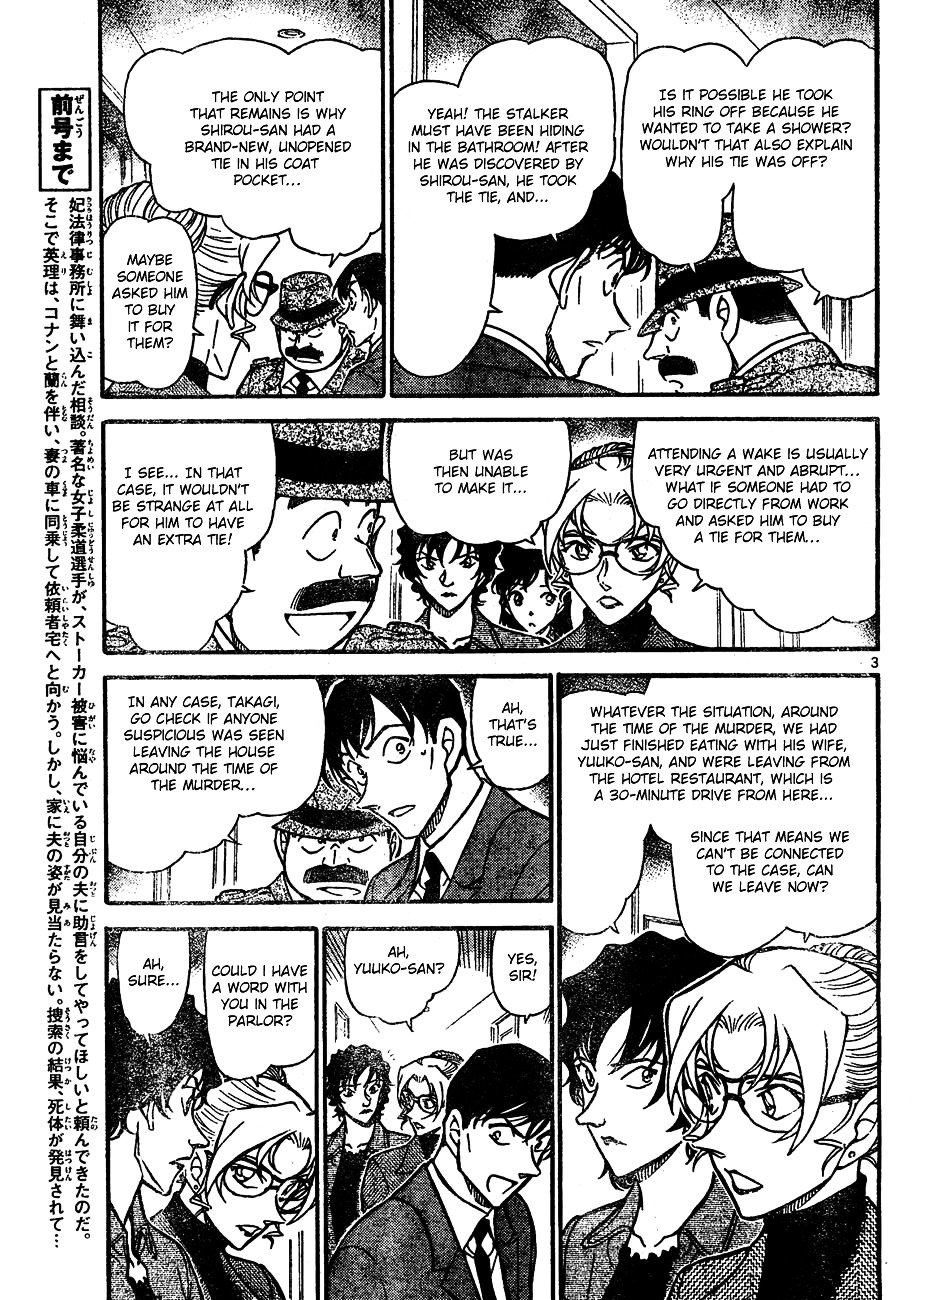 Detective Conan chapter 645 page 3